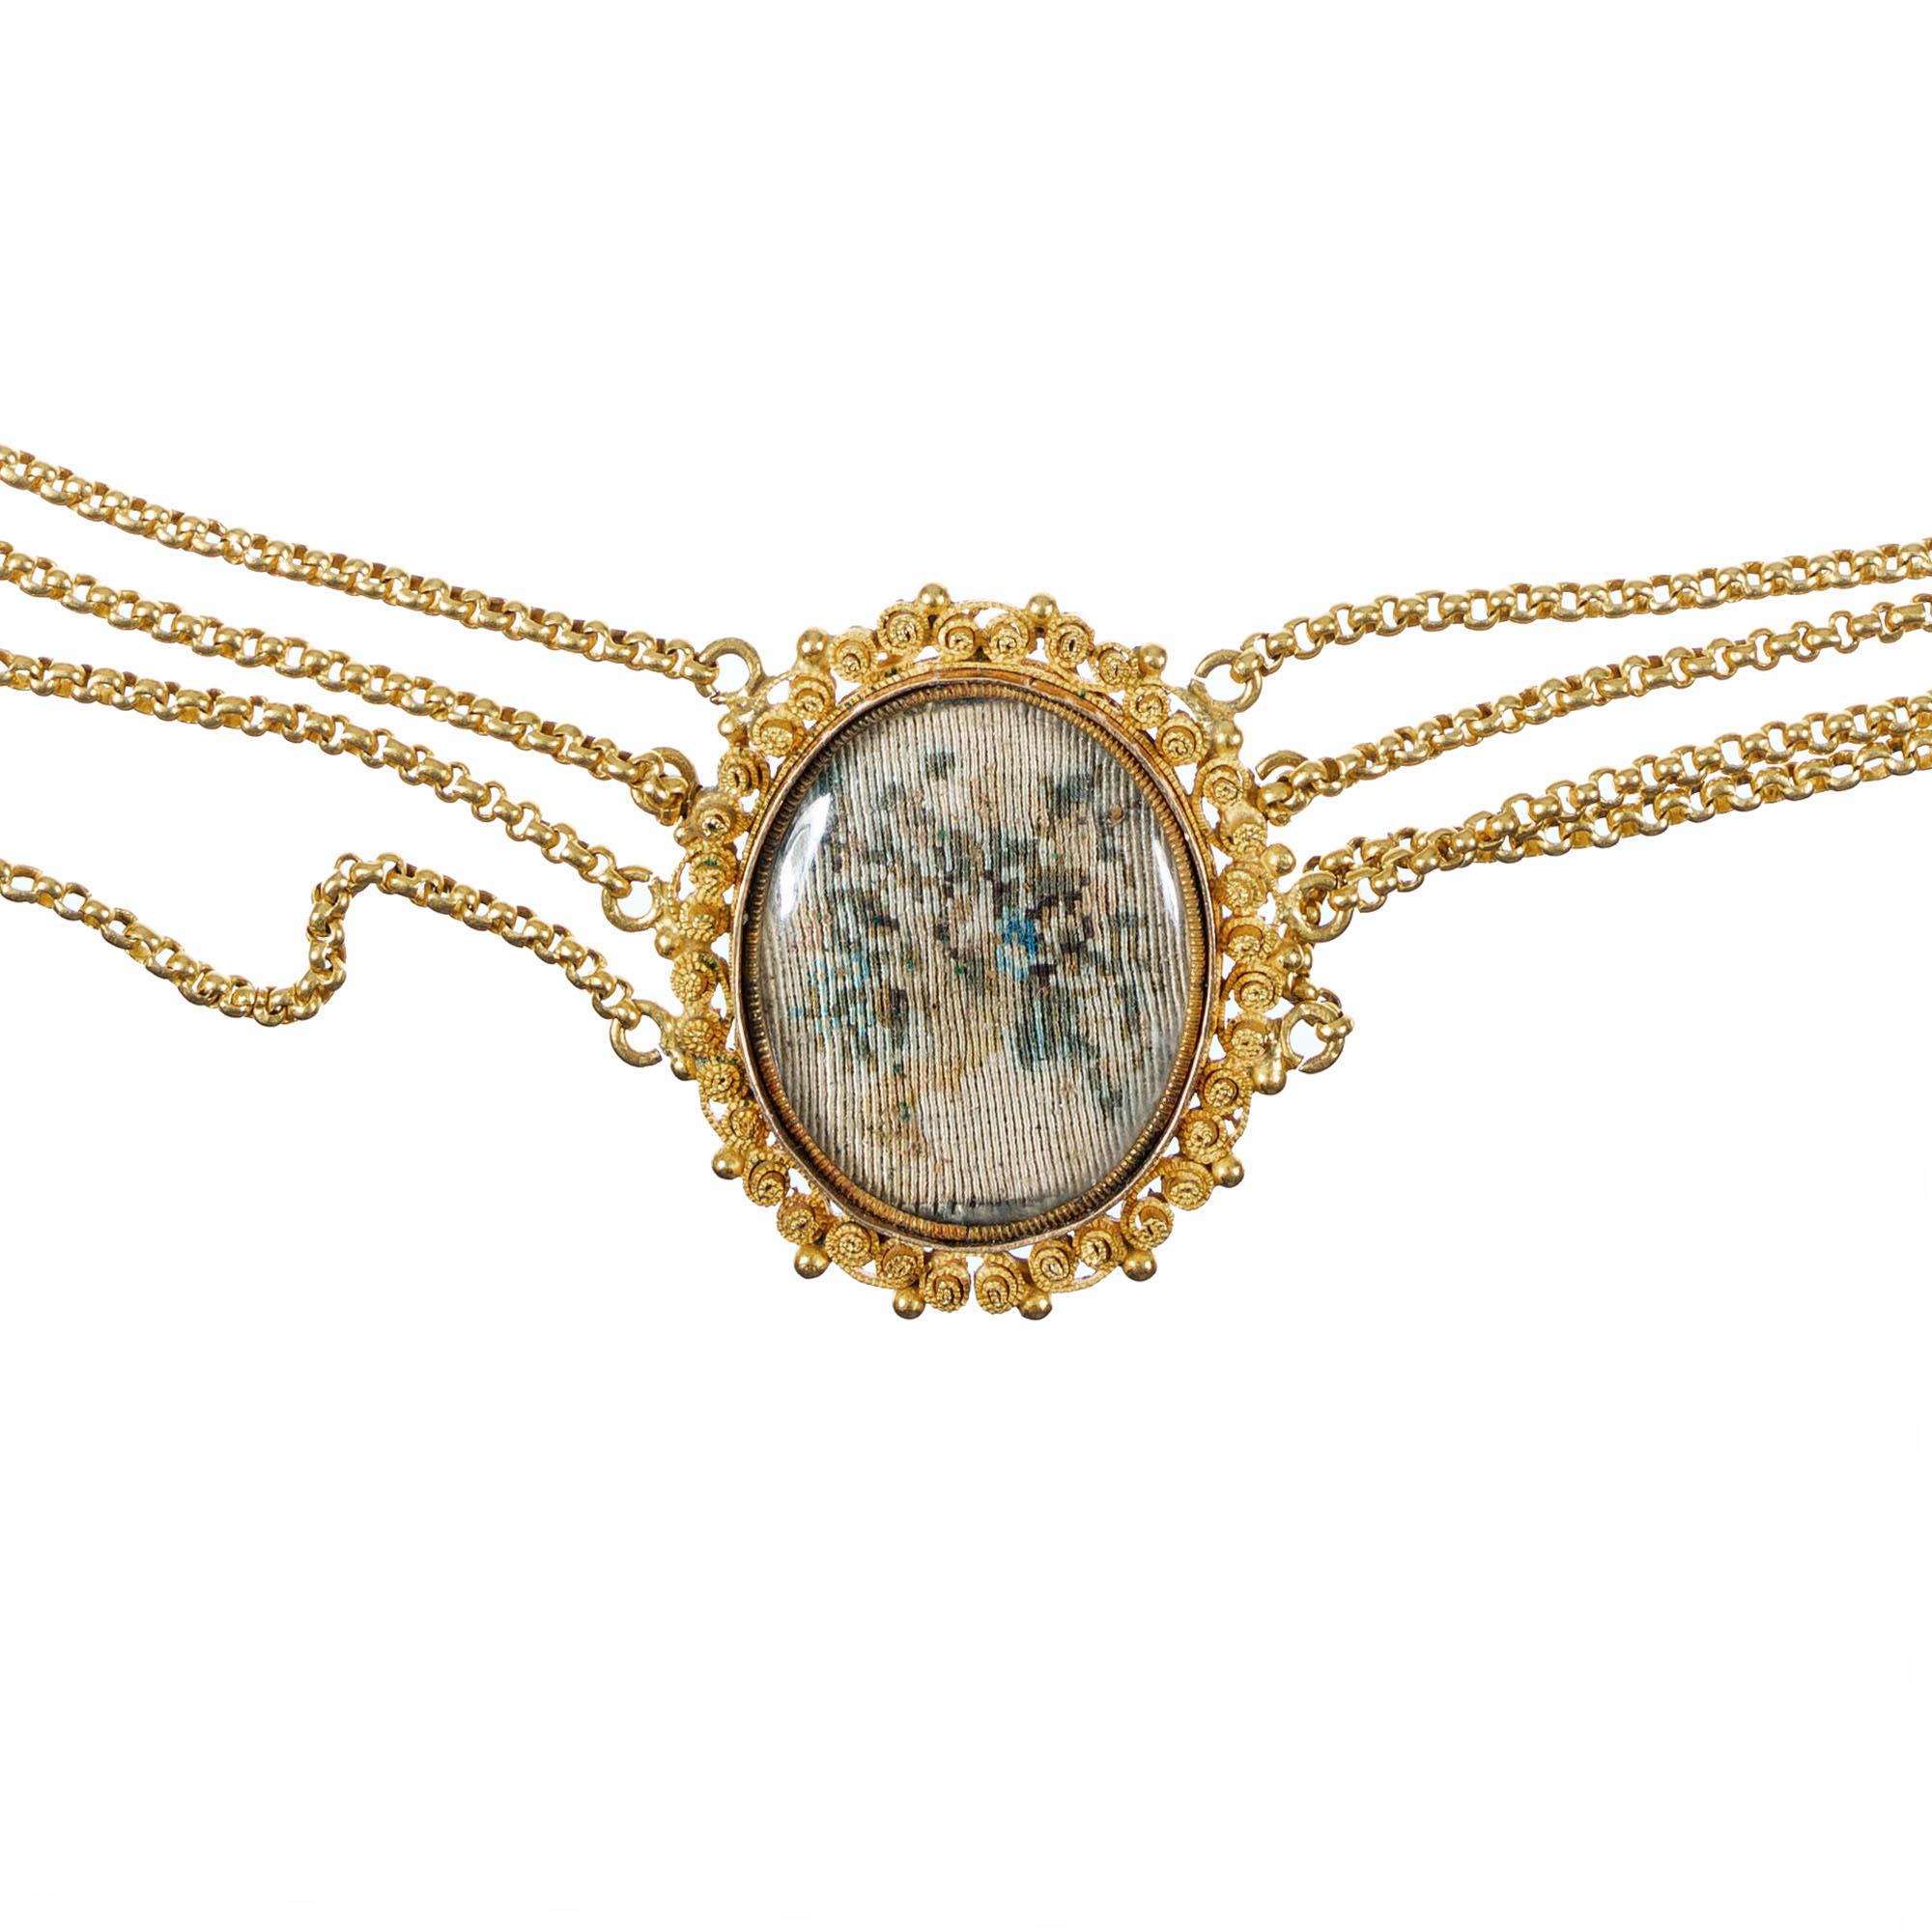 Victorian handmade French 18k gold necklace with 7 handmade needlepoint flower sections in hand made gold frames.  4 strands of chain connect each section. The catch has enamel trim and is lettered Amitie (for Friendship).  Circa 1880's.  A crystal